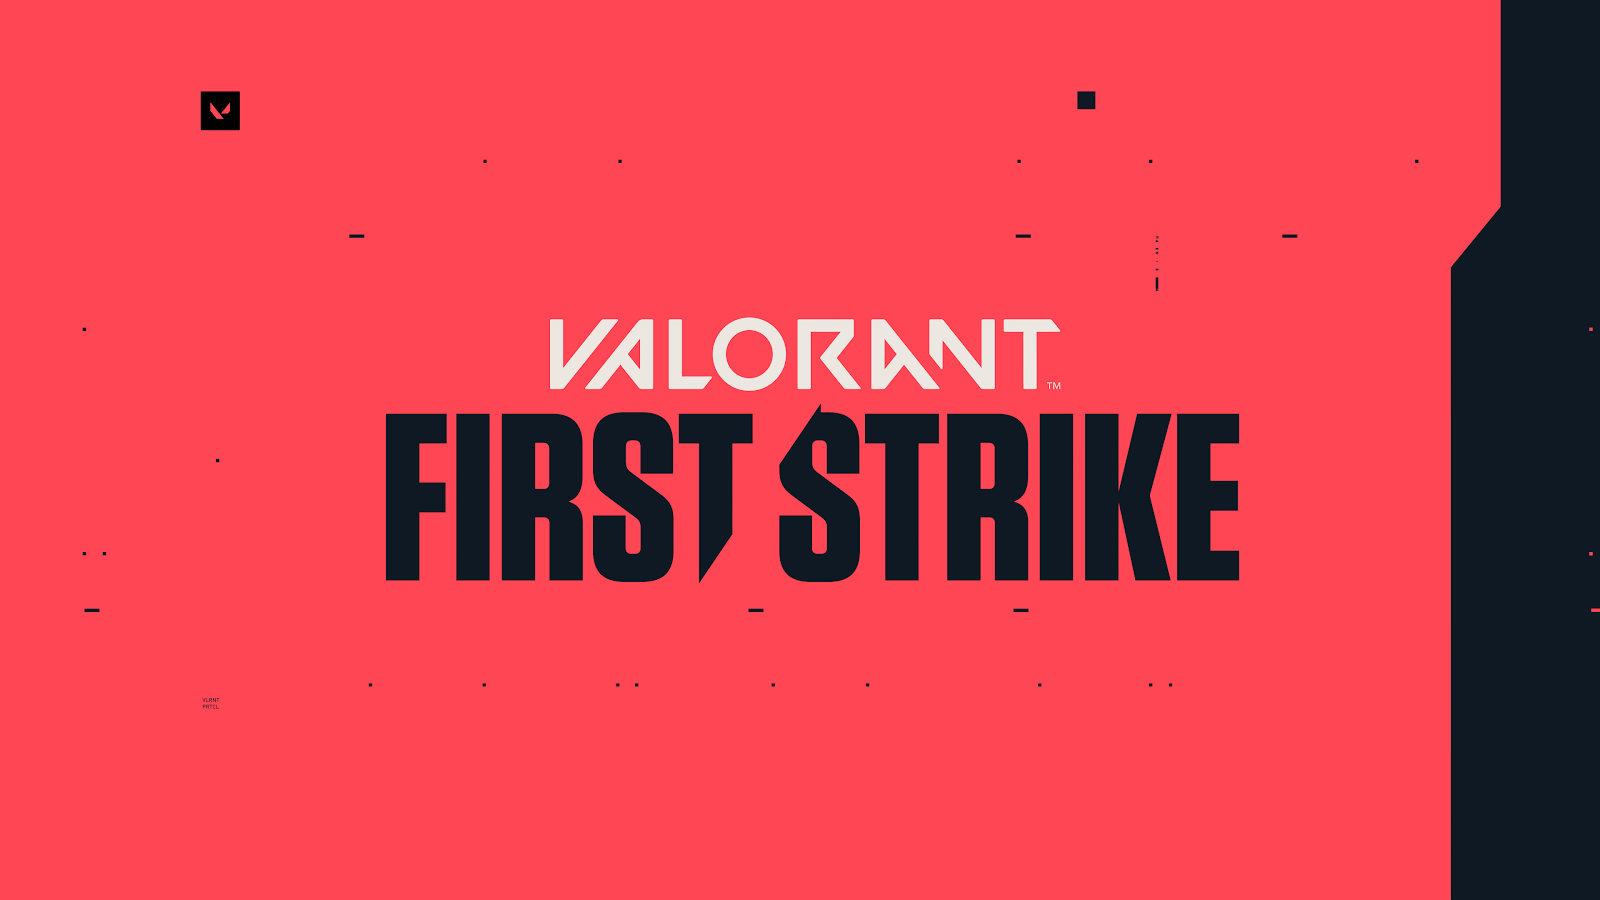 Riot introduces its first official VALORANT tournament, First Strike